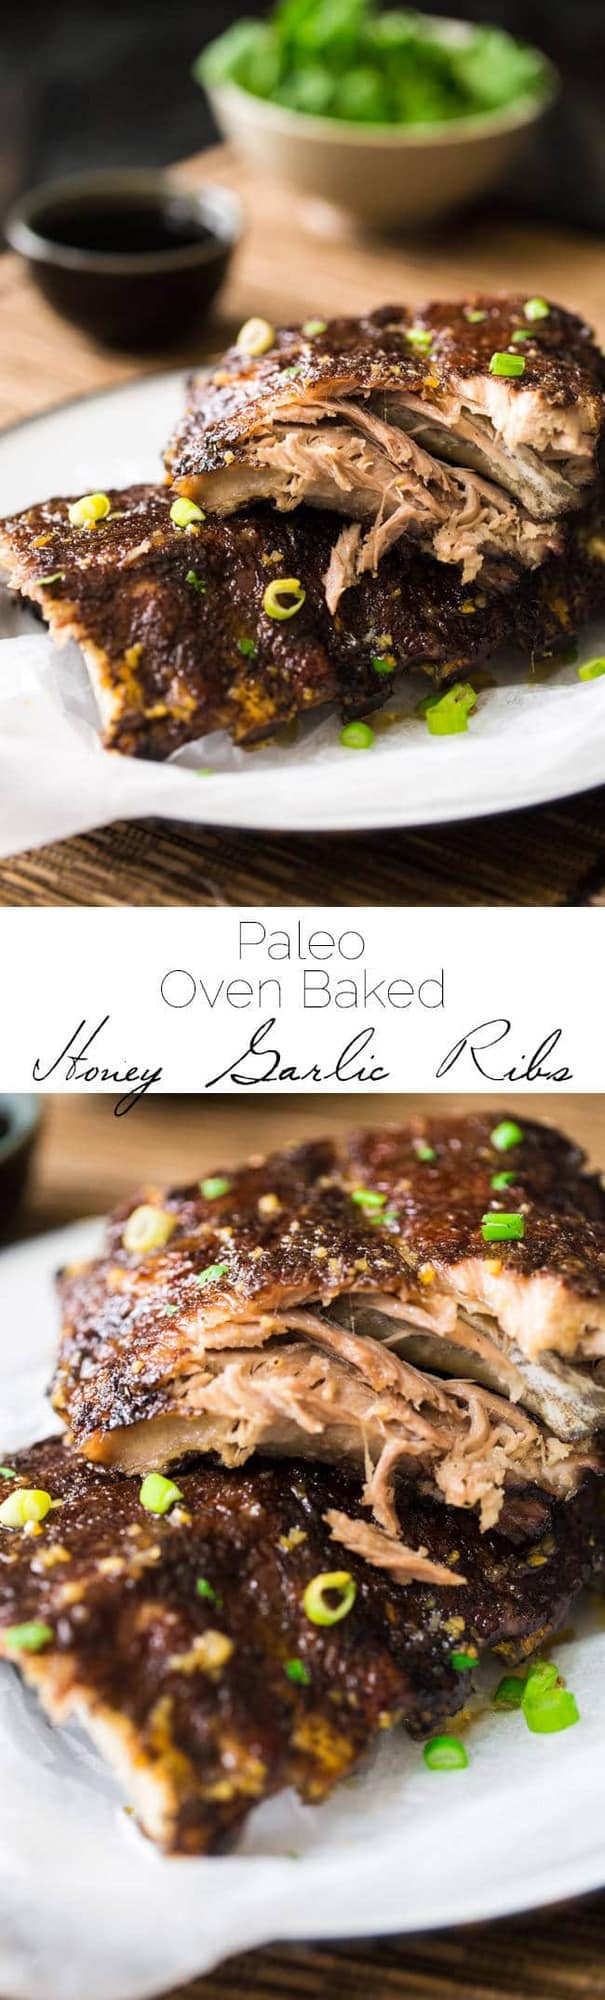 Paleo 5 Spice Honey Garlic Oven Baked Ribs - Sticky, sweet, healthier ribs that are gluten free, Paleo and made in the oven. These fall RIGHT OFF THE BONE! | Foodfaithfitness.com | @FoodFaithFit